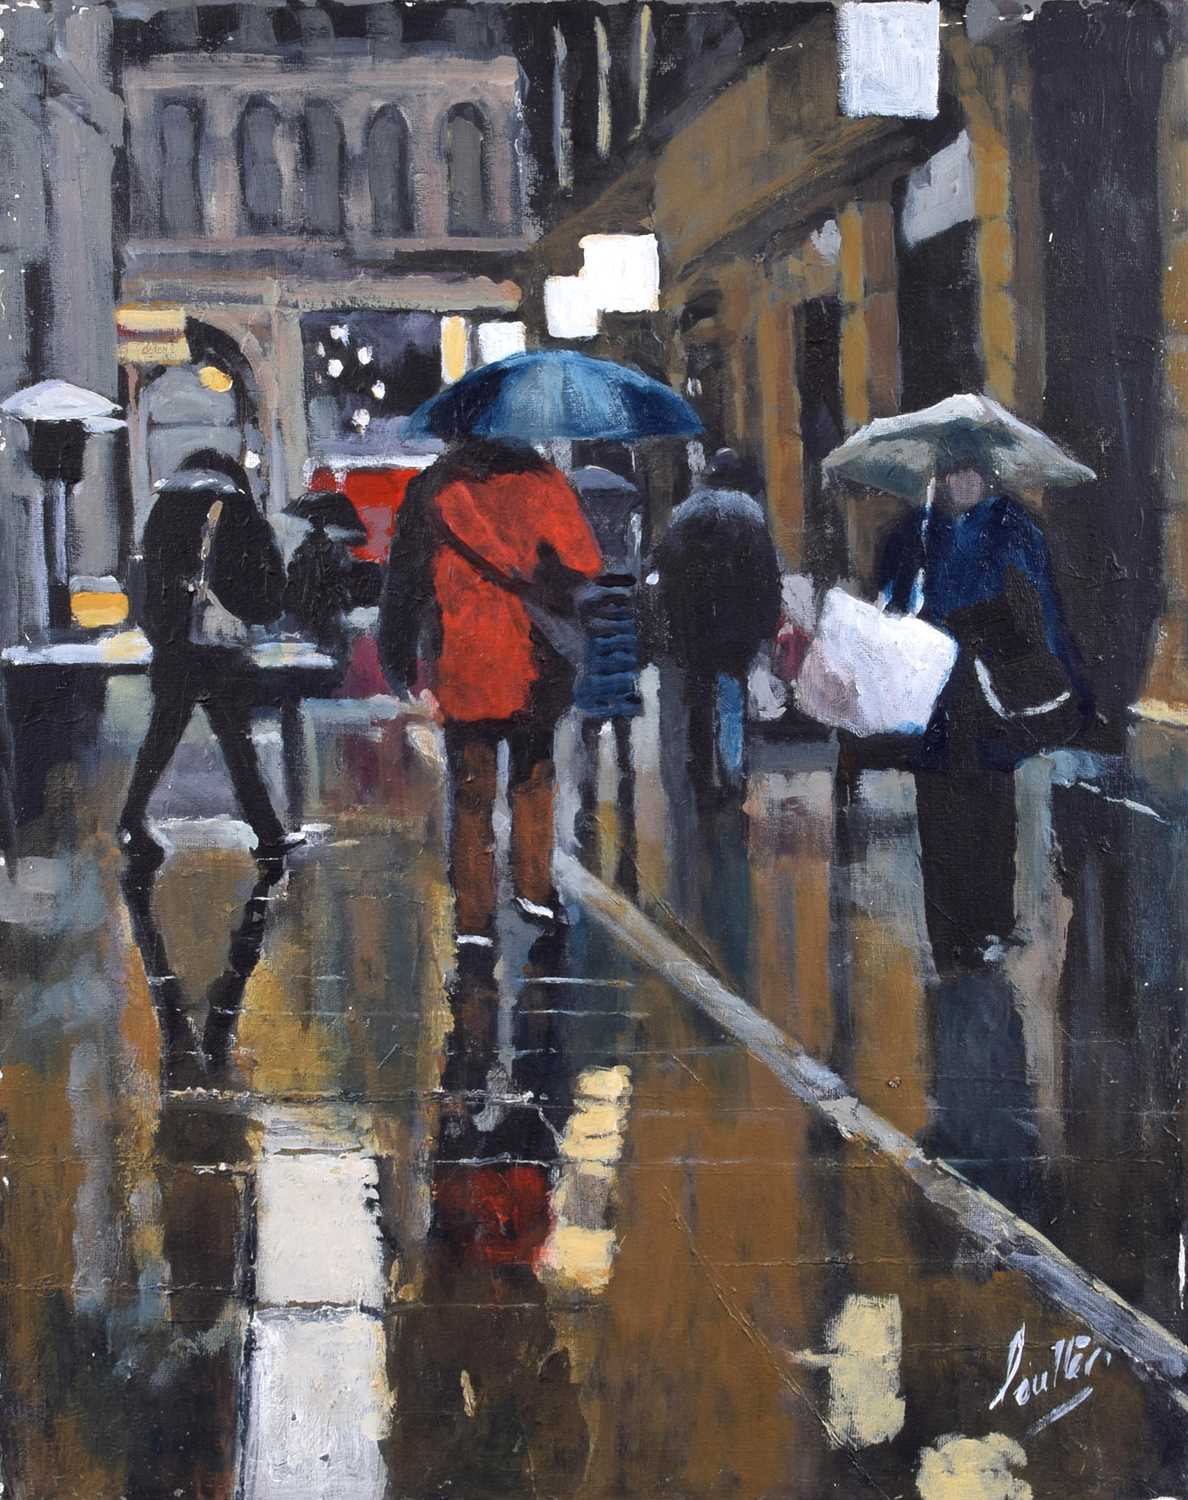 David Coulter (British 20th/21st century) "In between St. Anne's Square and Cross Street"